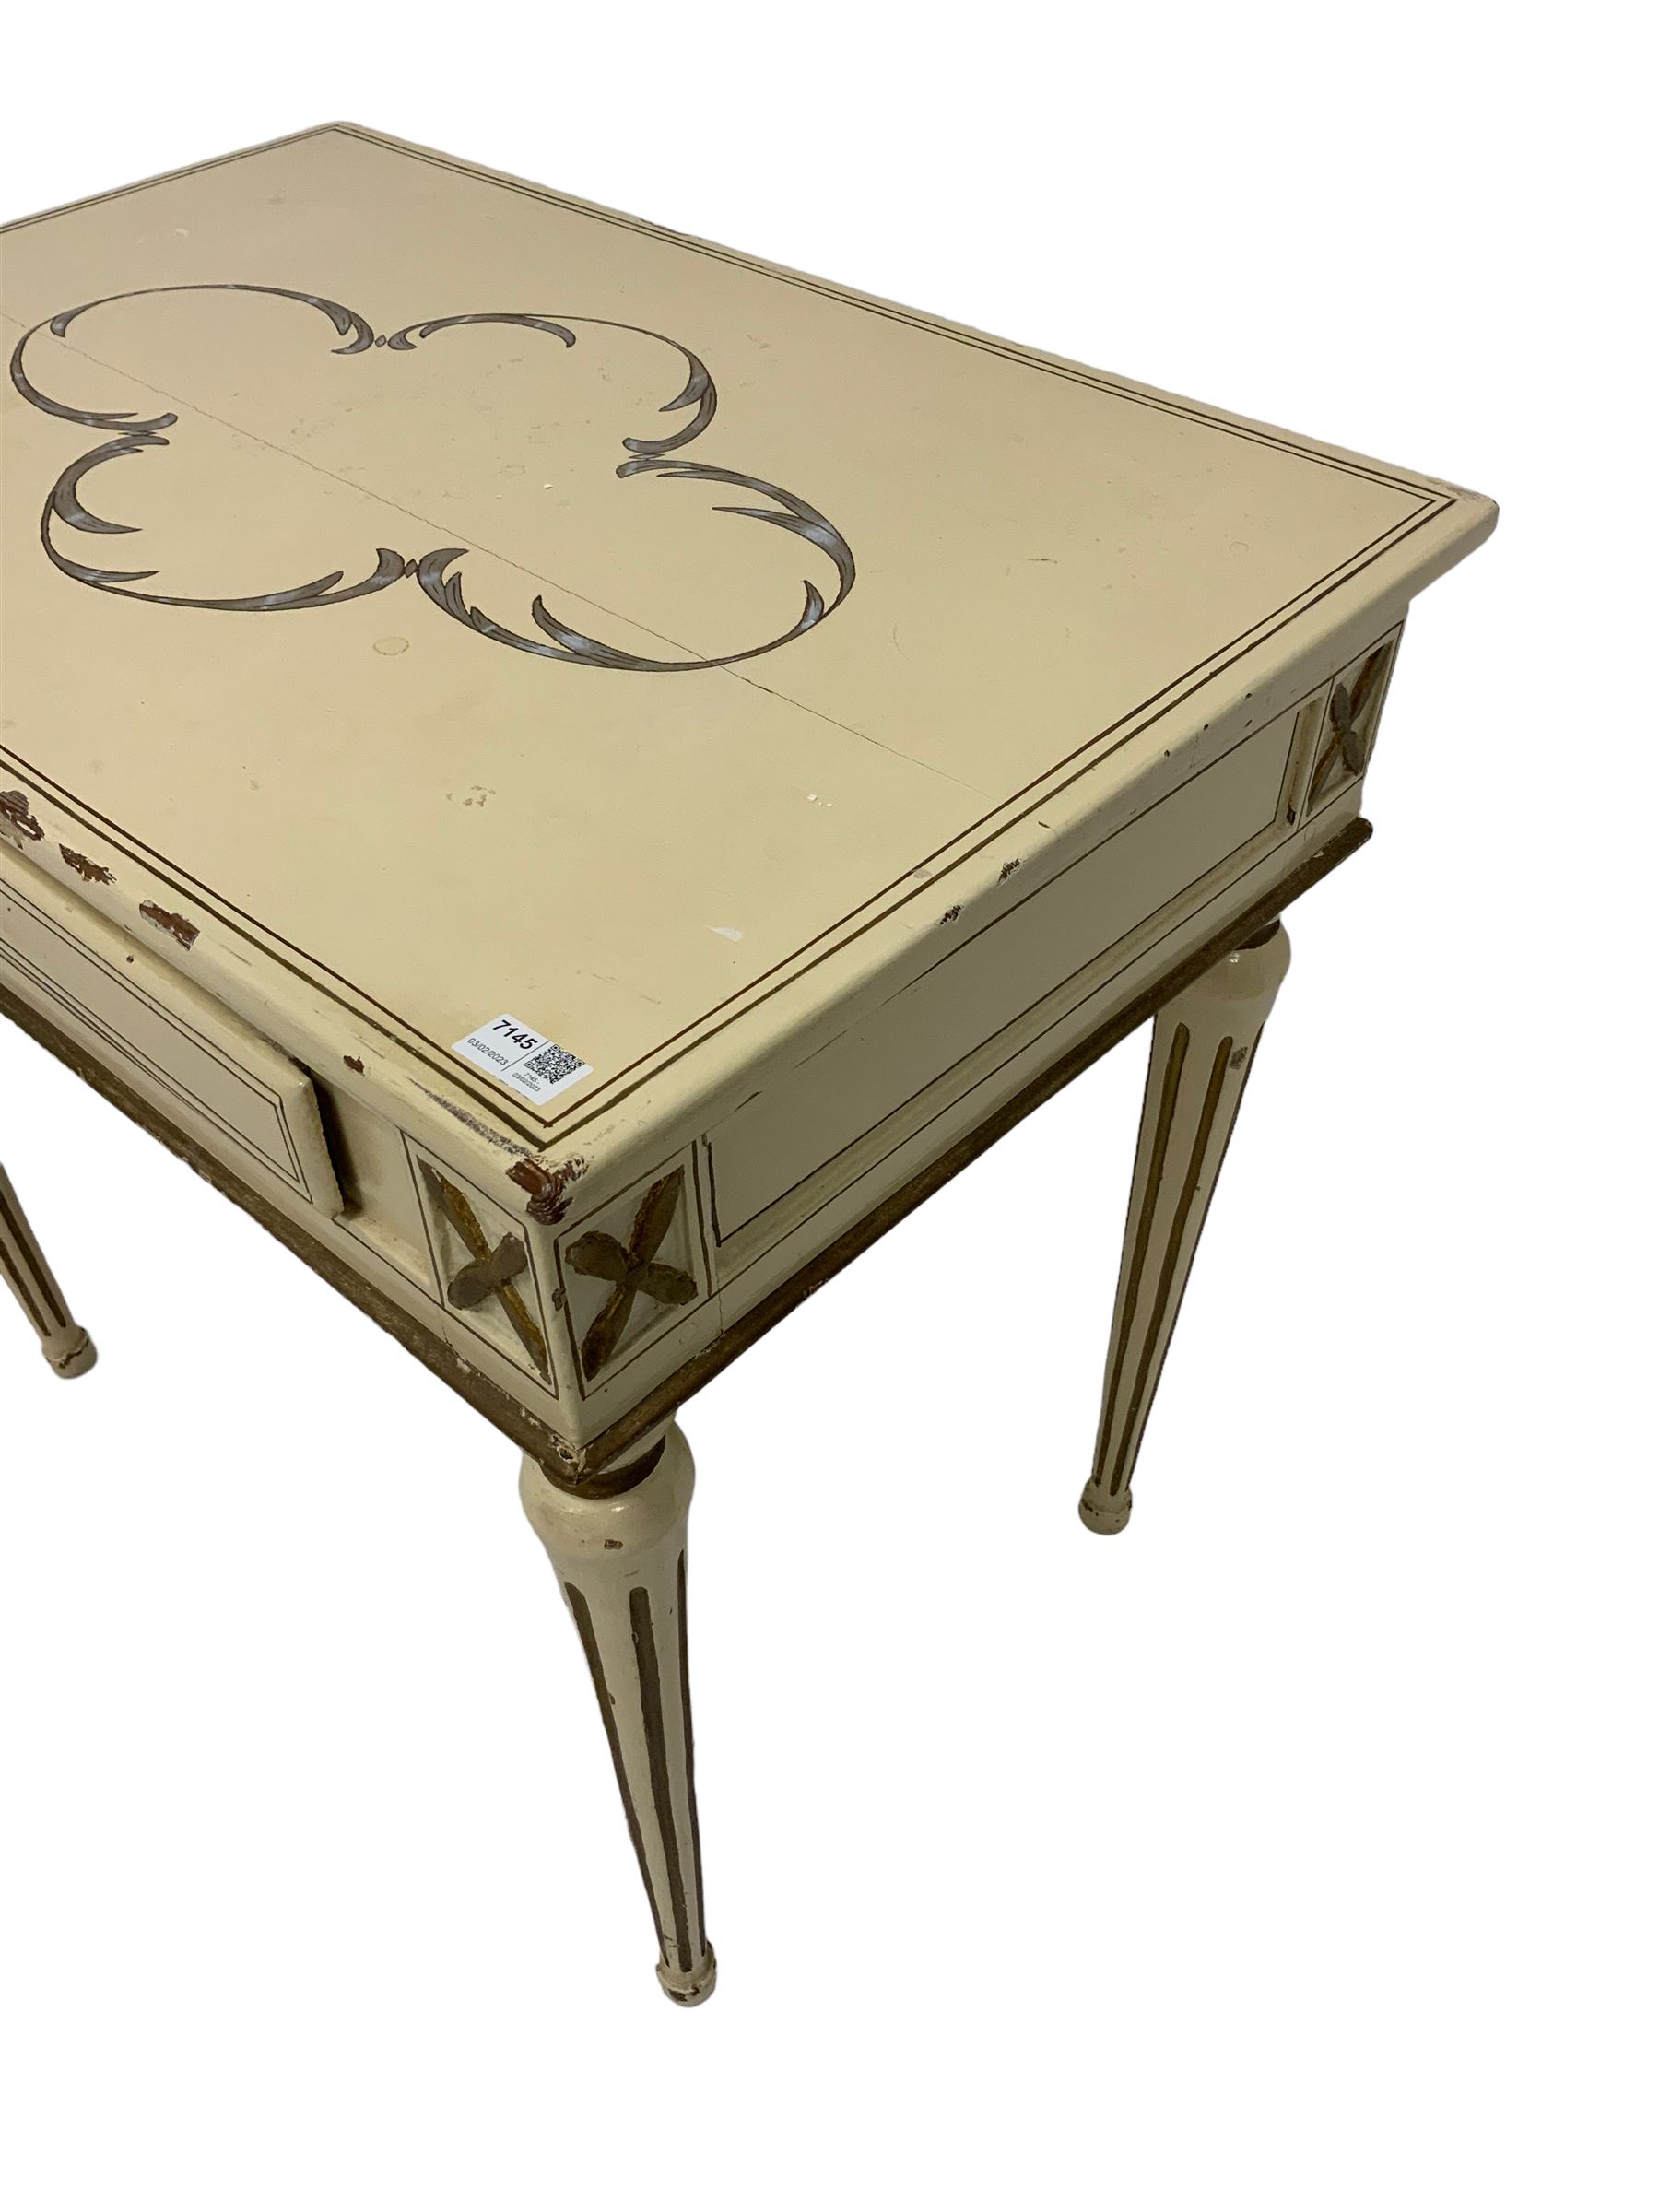 19th century Continental painted and gilded pine side table - Image 3 of 5